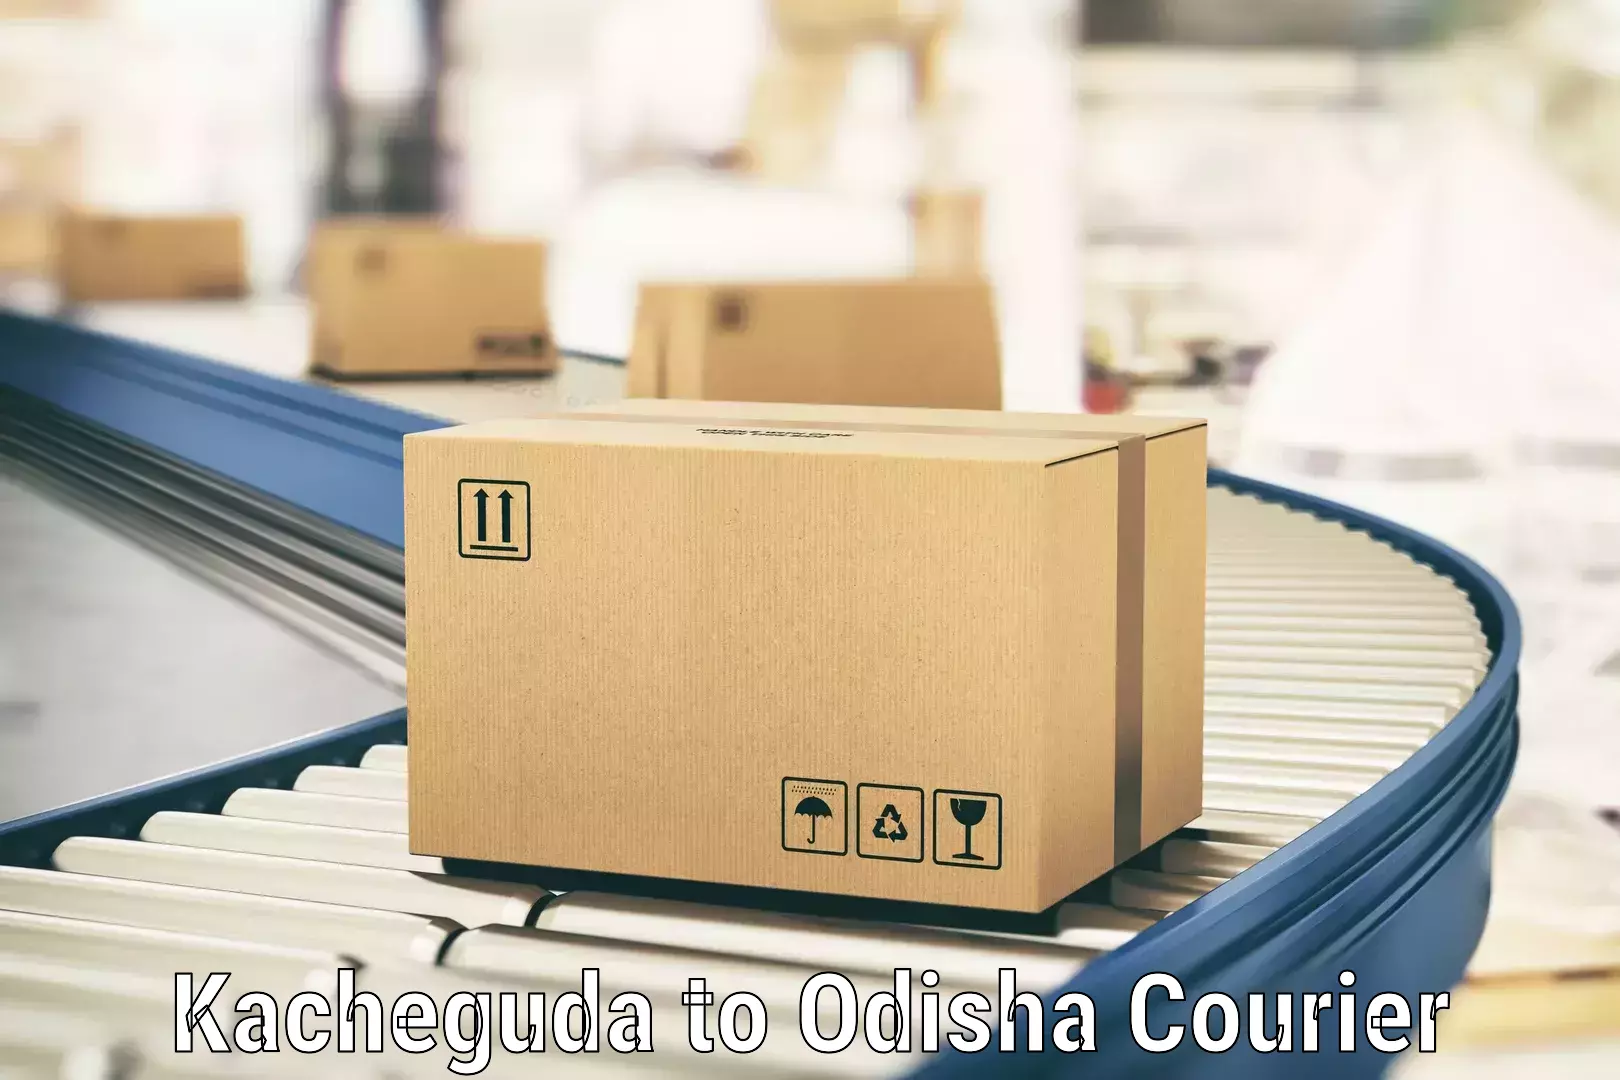 Affordable parcel rates in Kacheguda to Aul